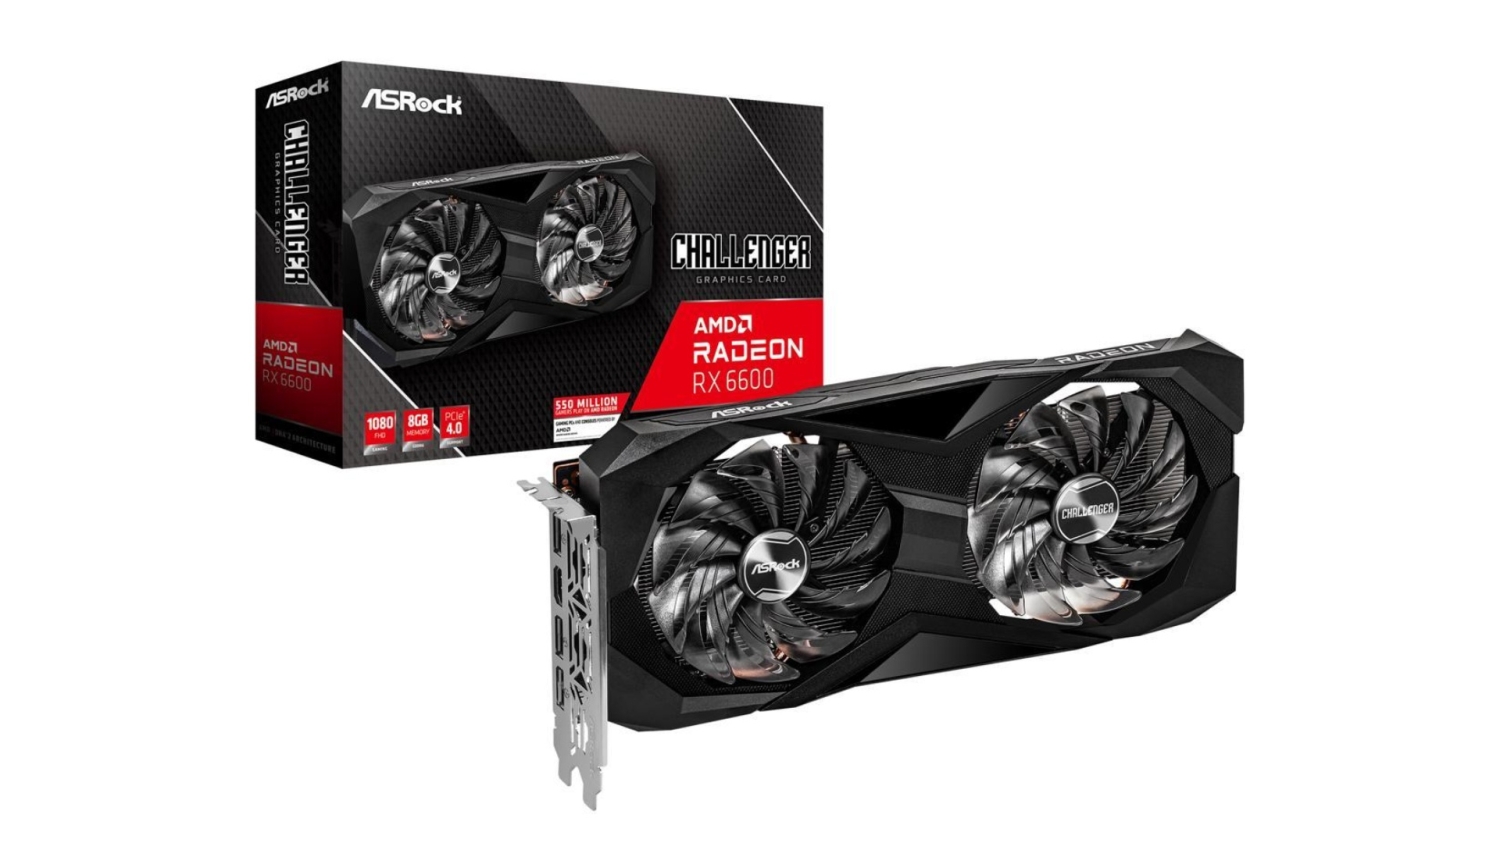 ASRock Radeon RX 6600 is available for just $180 in the US via Newegg